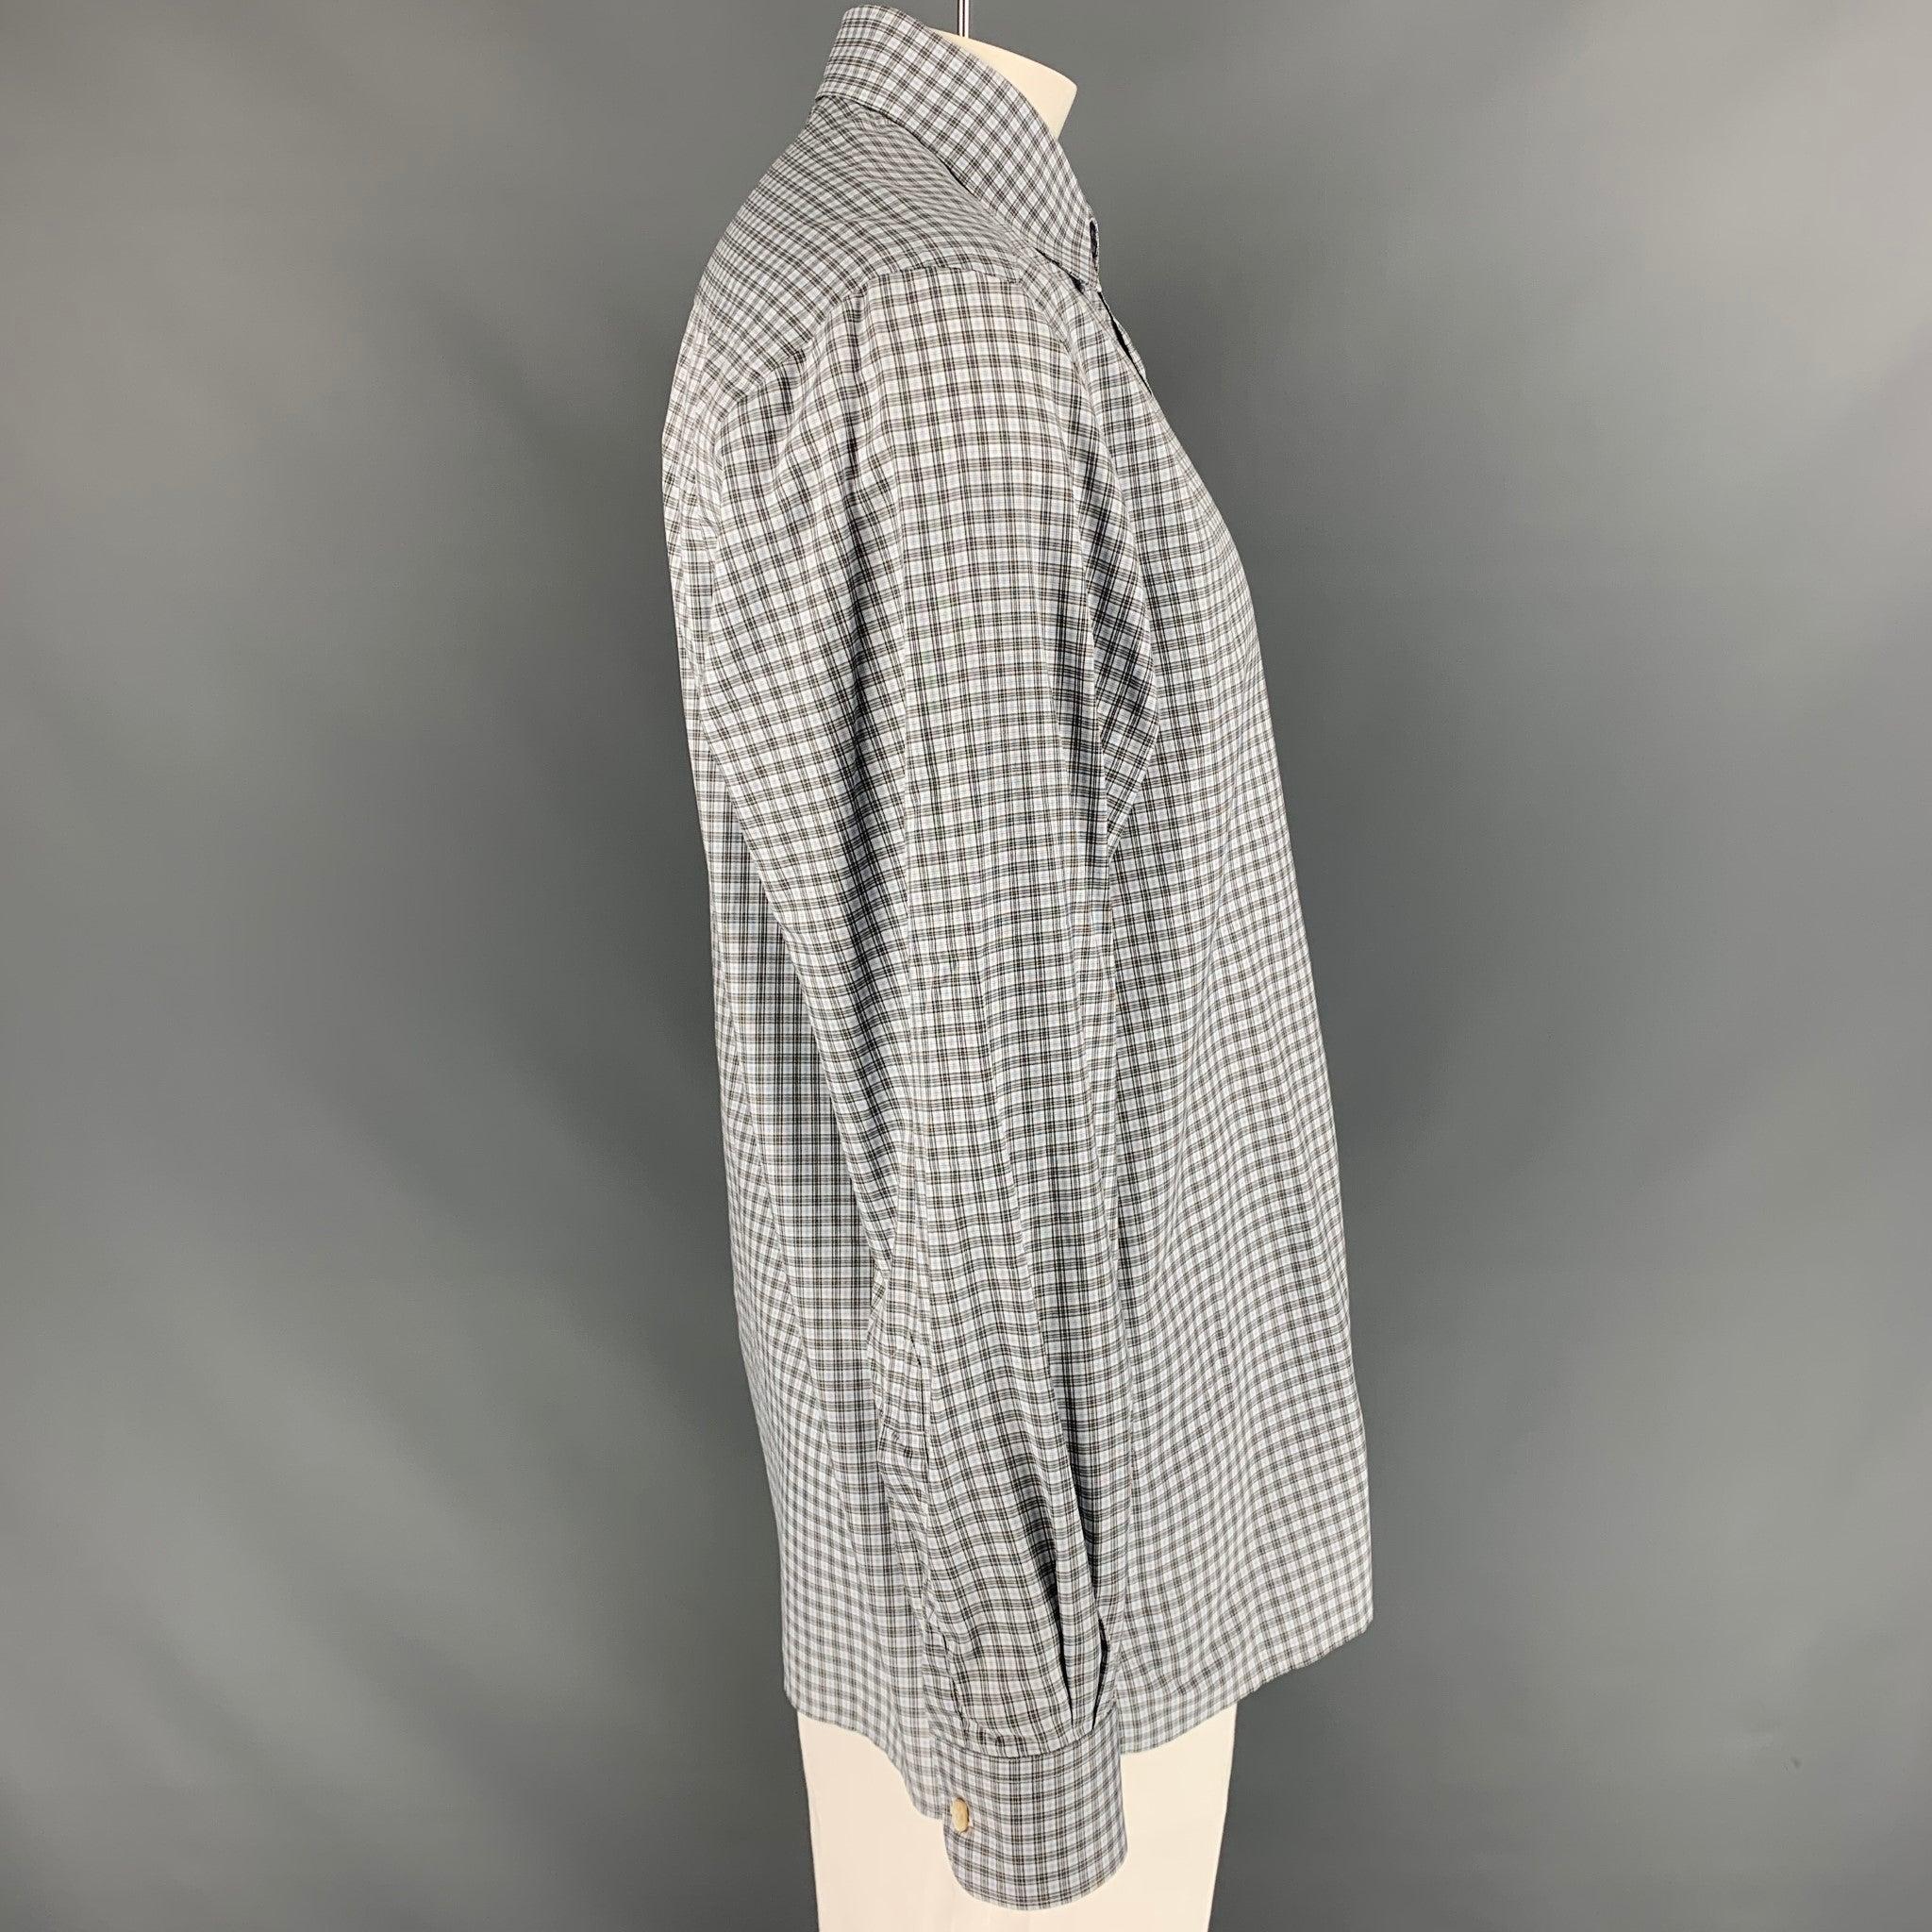 ERMENEGILDO ZEGNA long sleeve shirt comes in blue and brown plaid cotton featuring a patch pocket at left front panel, spread collar, one button round cuff, and button up closure. Very Good Pre-Owned Condition. 

Marked:   L 

Measurements: 
